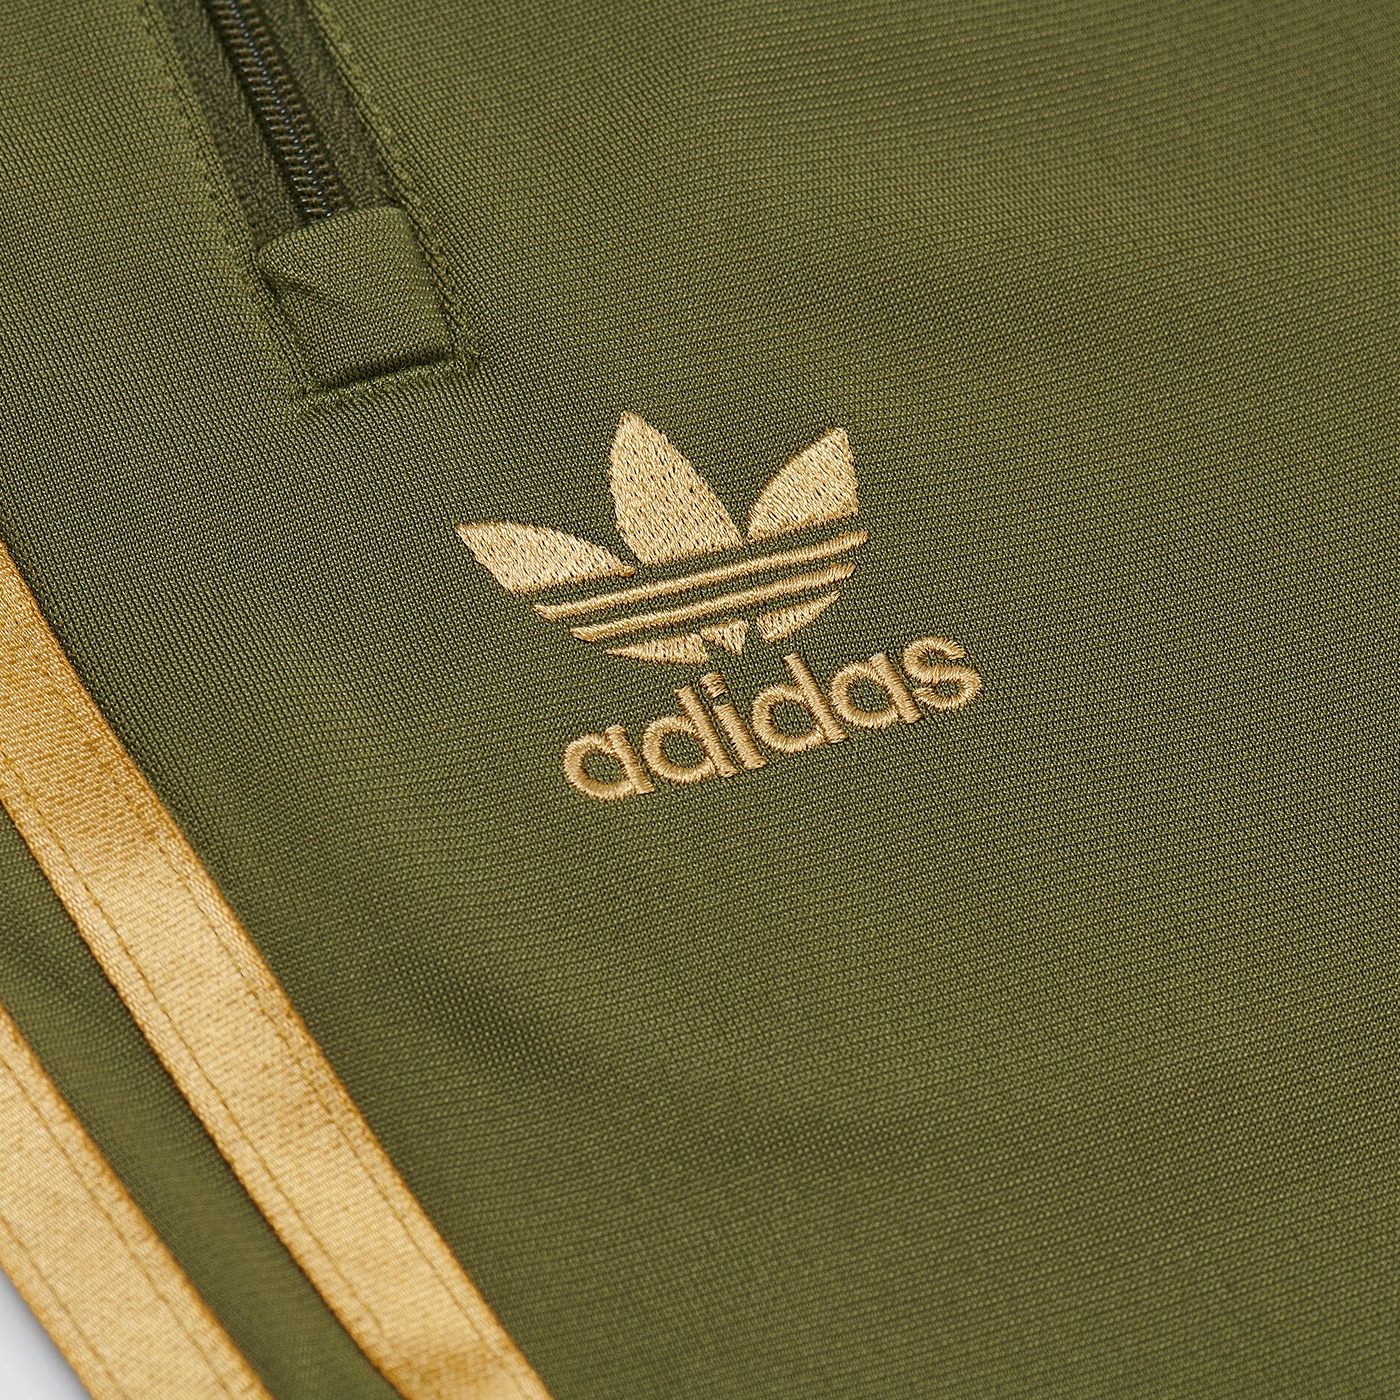 Adidas Palace Firebird Track Pant Olive one color - Spring 2023